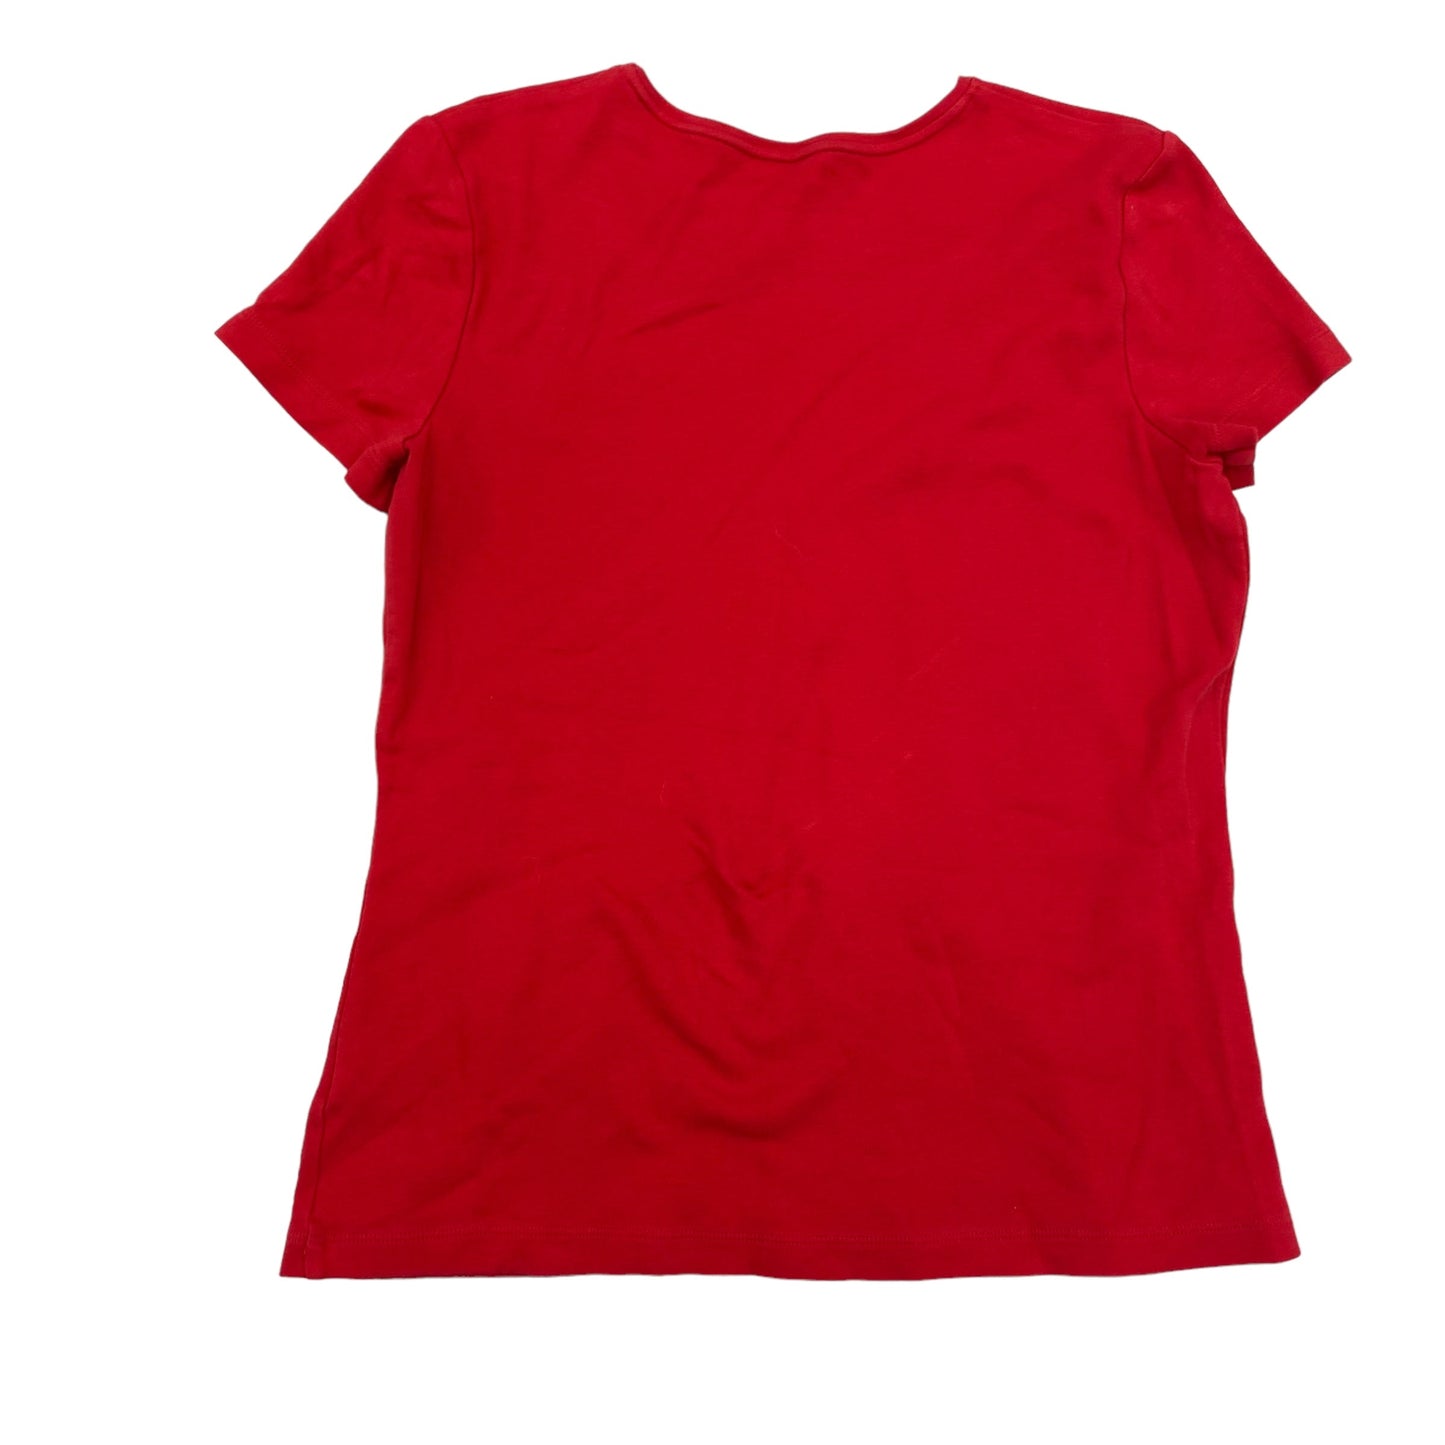 RED CROFT AND BARROW TOP SS BASIC, Size S